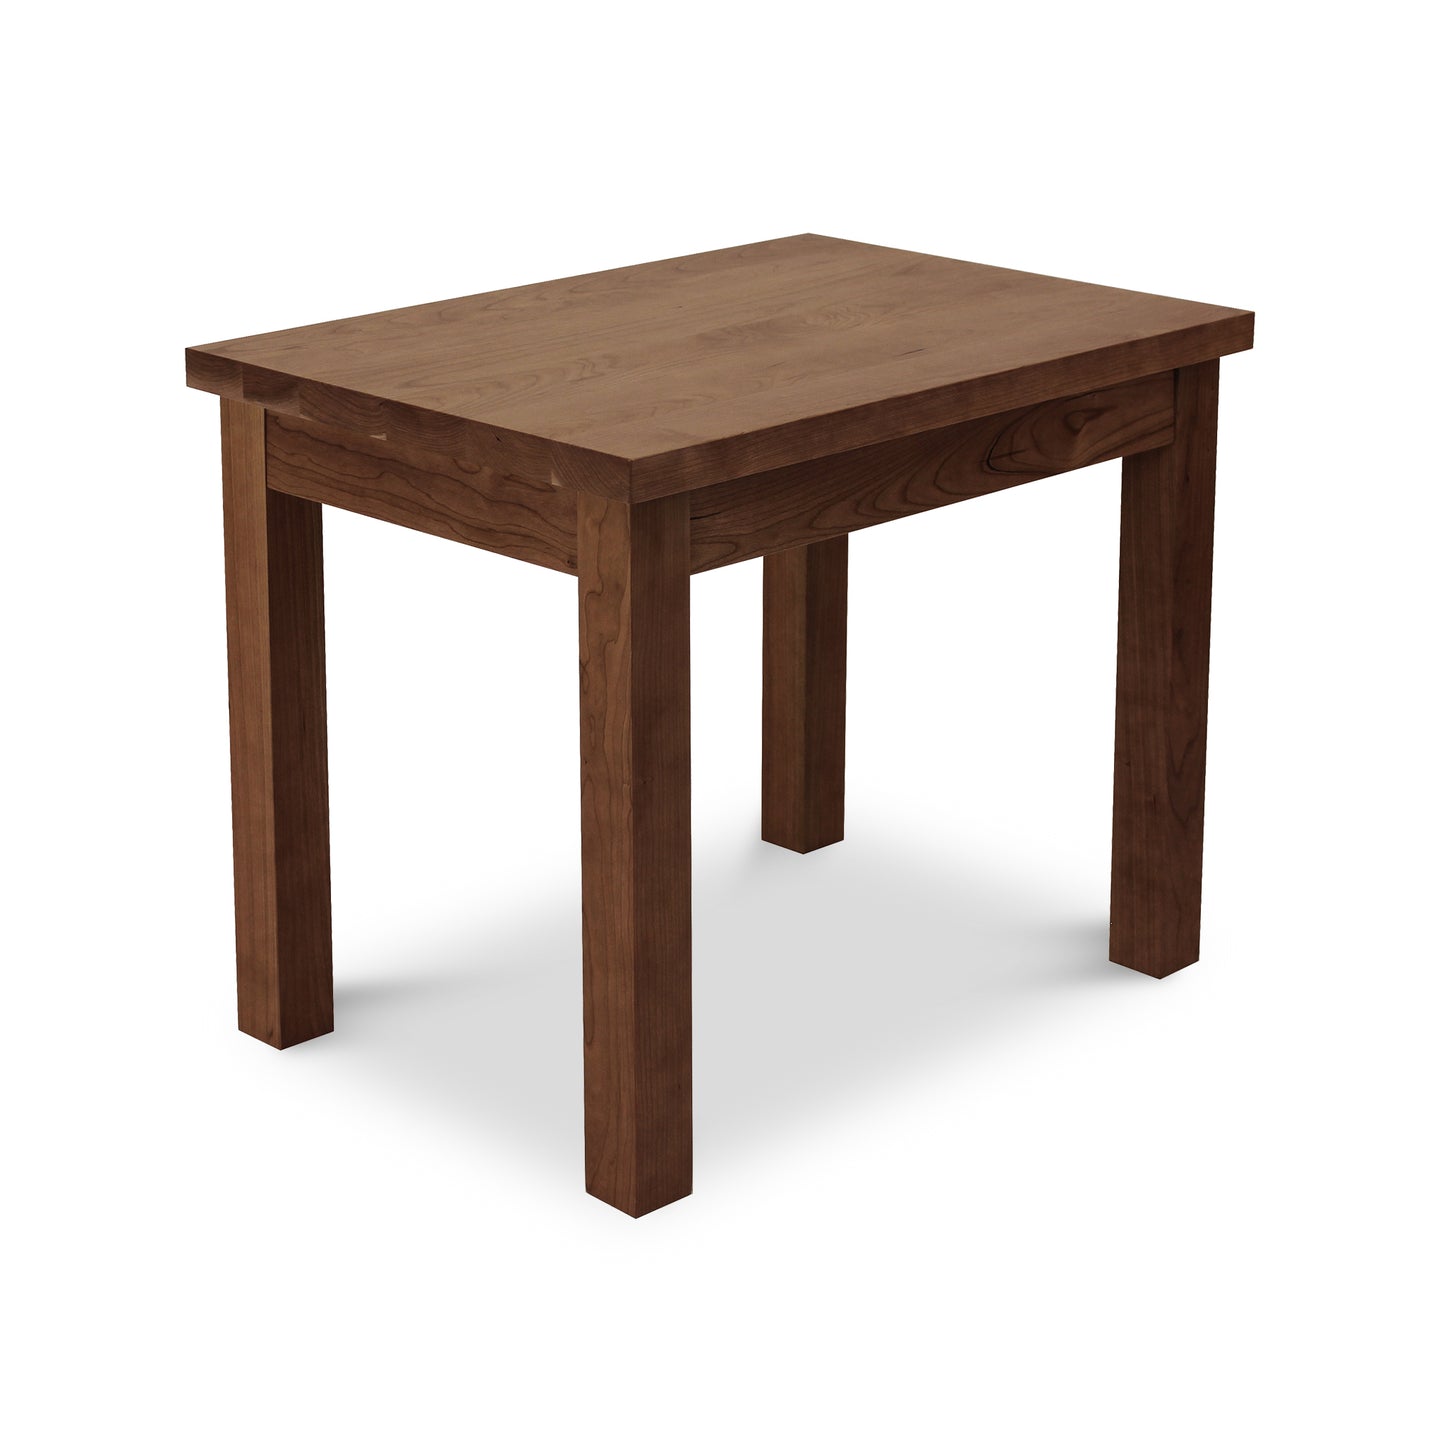 A Modern Mission End Table with a wooden top on a white background by Lyndon Furniture.